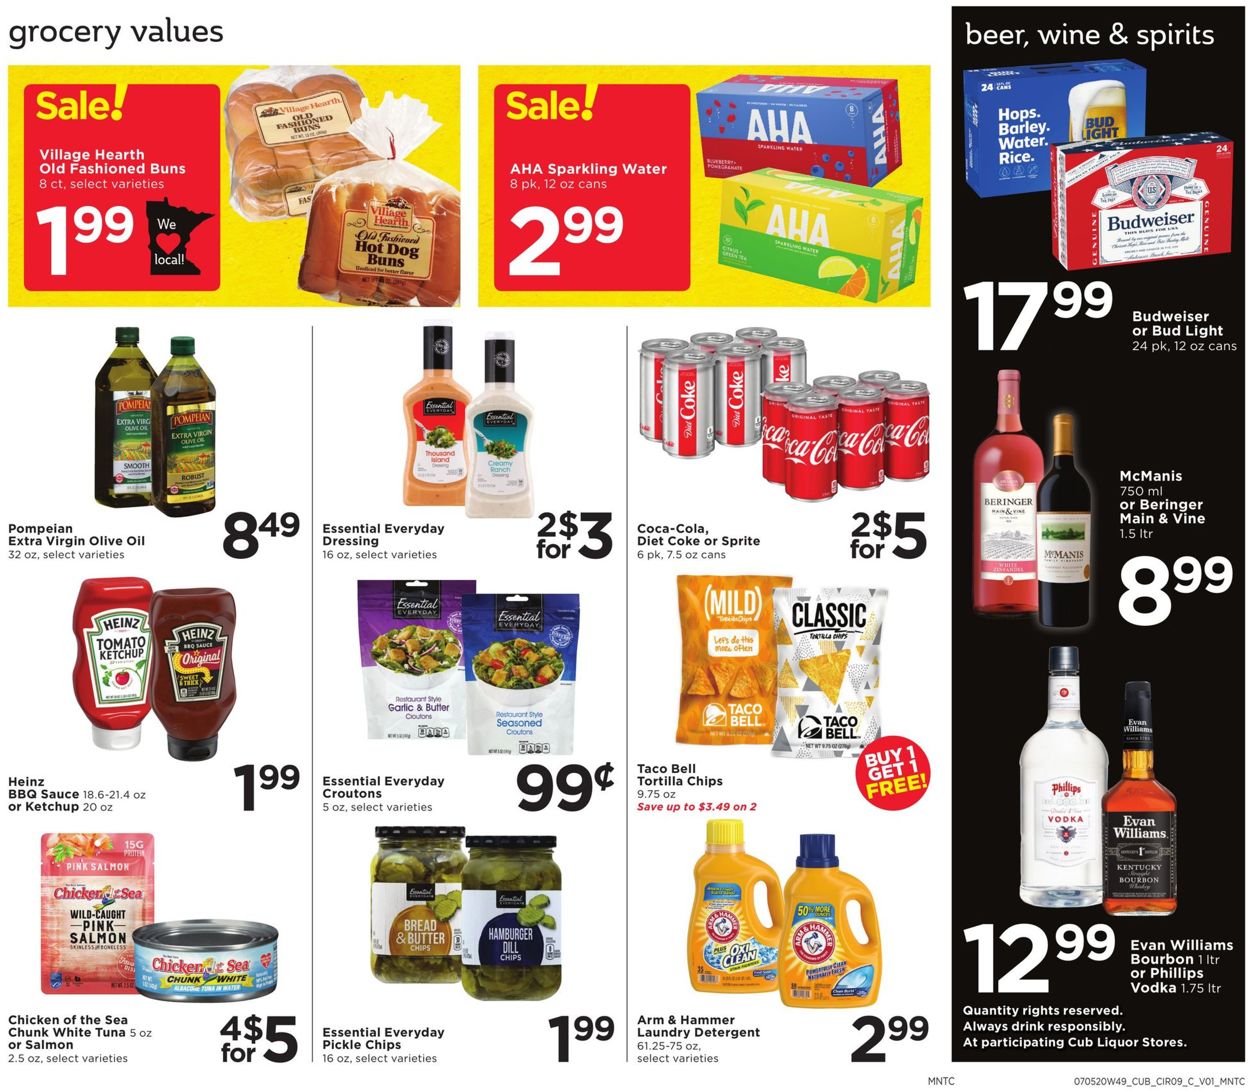 Catalogue Cub Foods from 07/05/2020